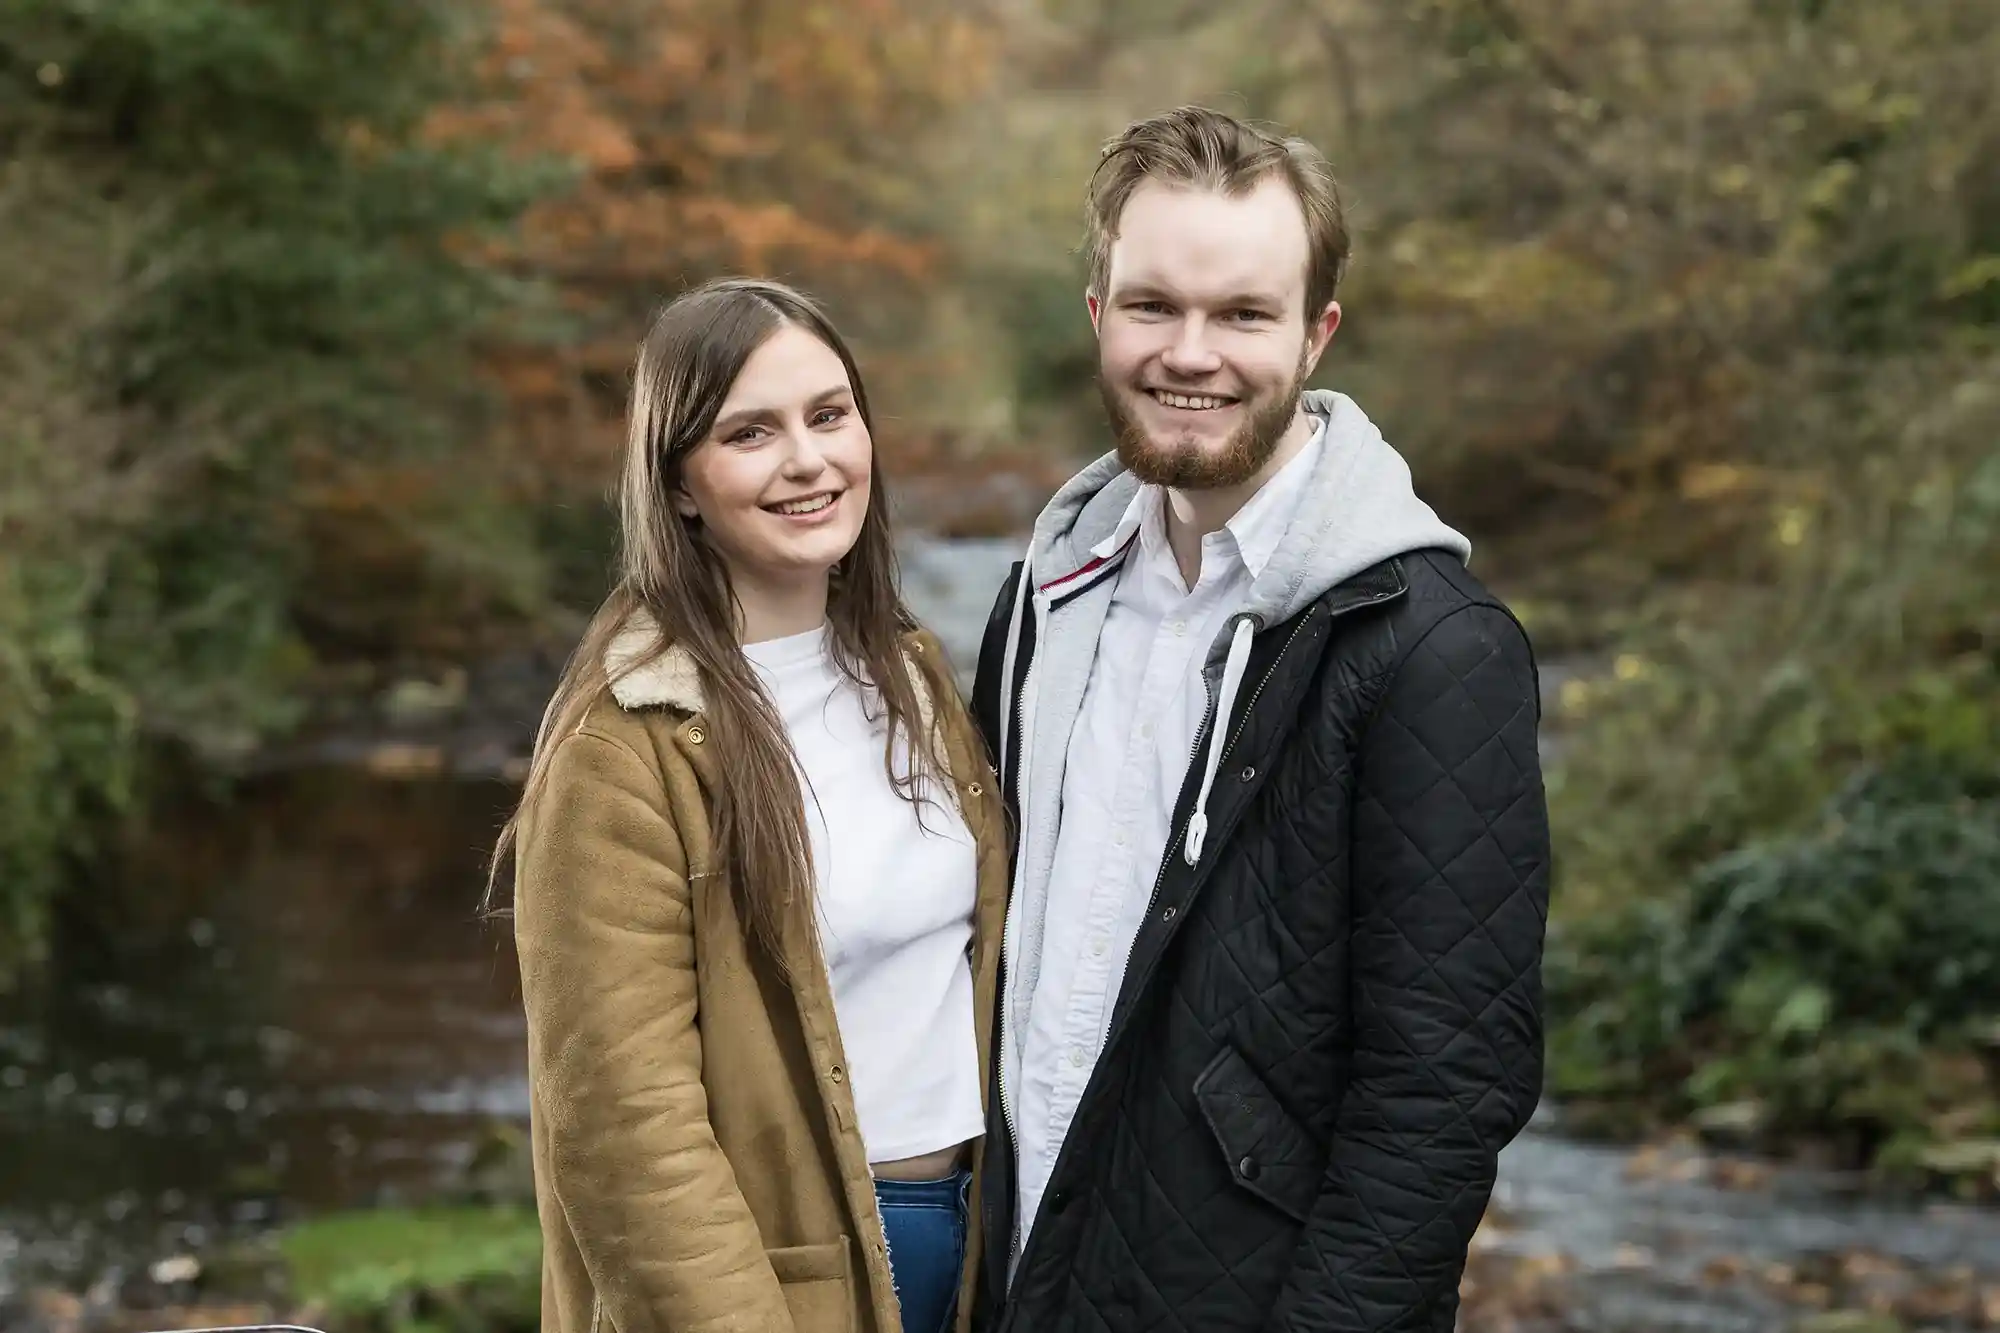 A man and woman stand outdoors near a flowing creek with autumn foliage in the background. Both are smiling at the camera.